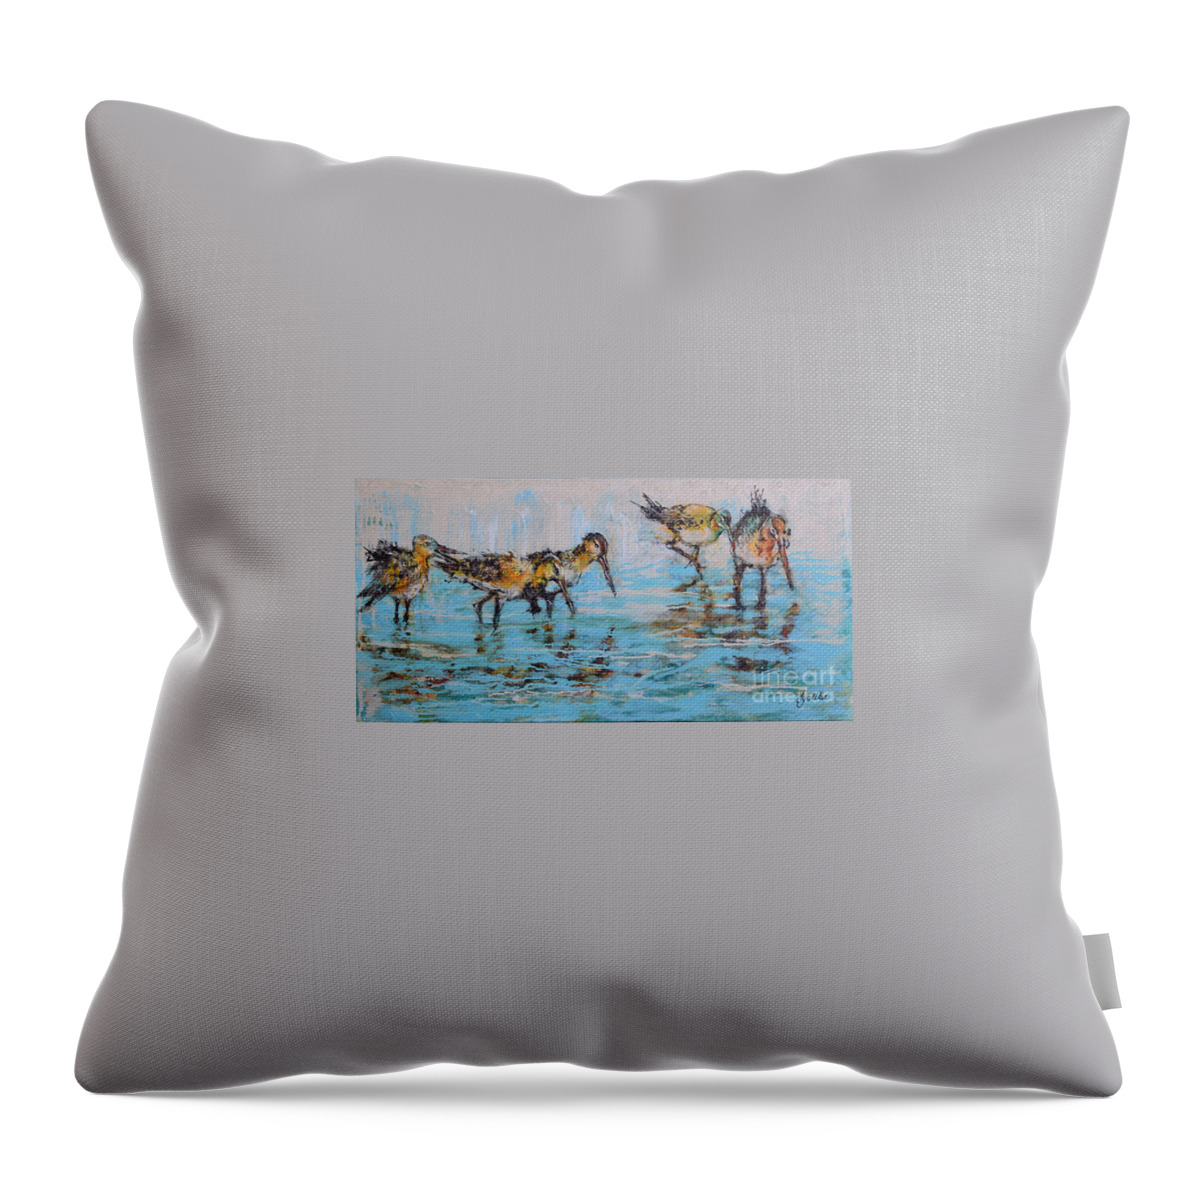  Throw Pillow featuring the painting Black-Tailed Godwits by Jyotika Shroff